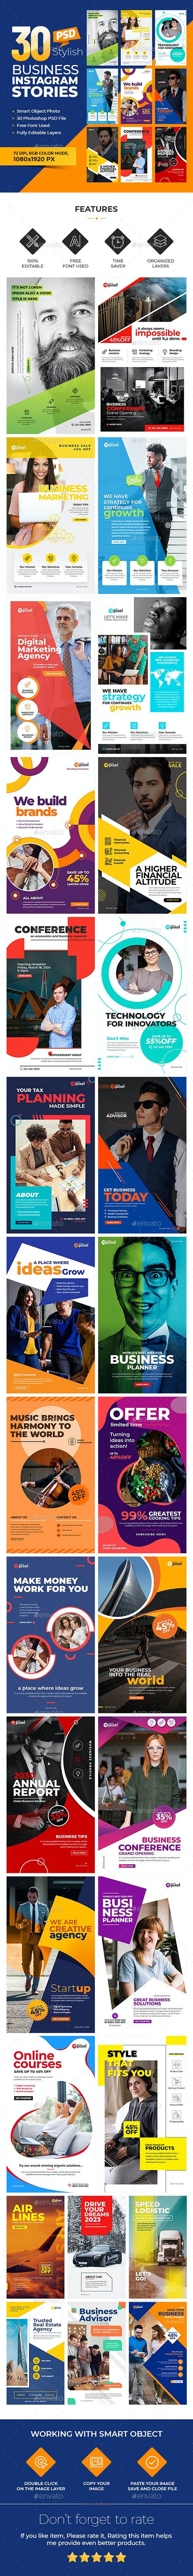 GraphicRiver - Instagram Business Stories Banners - 27715116